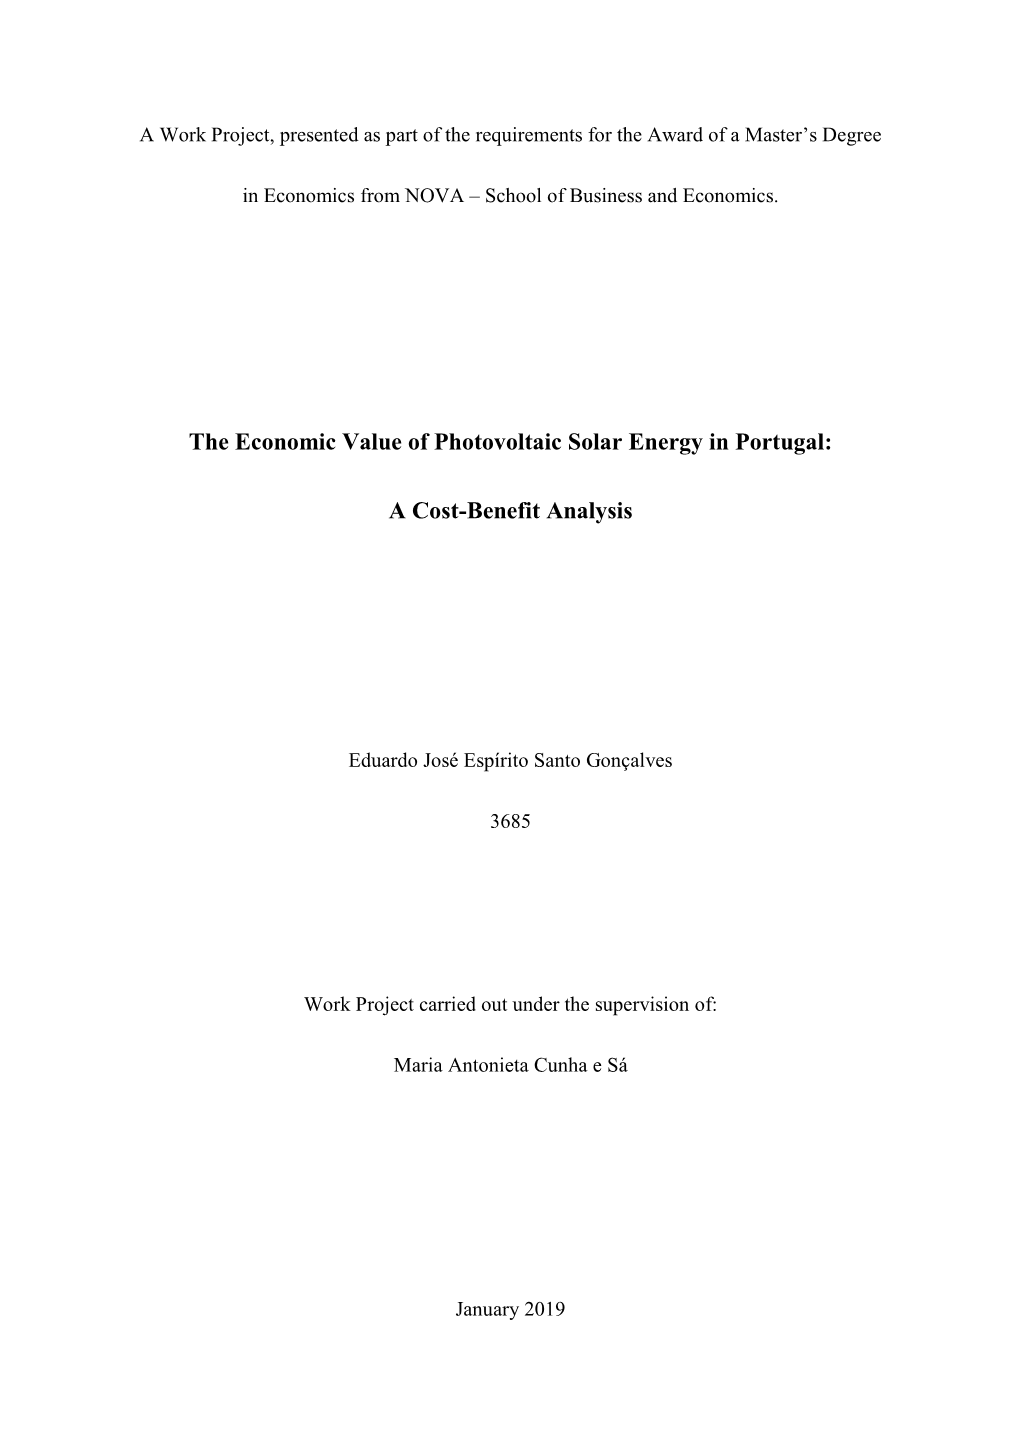 The Economic Value of Photovoltaic Solar Energy in Portugal